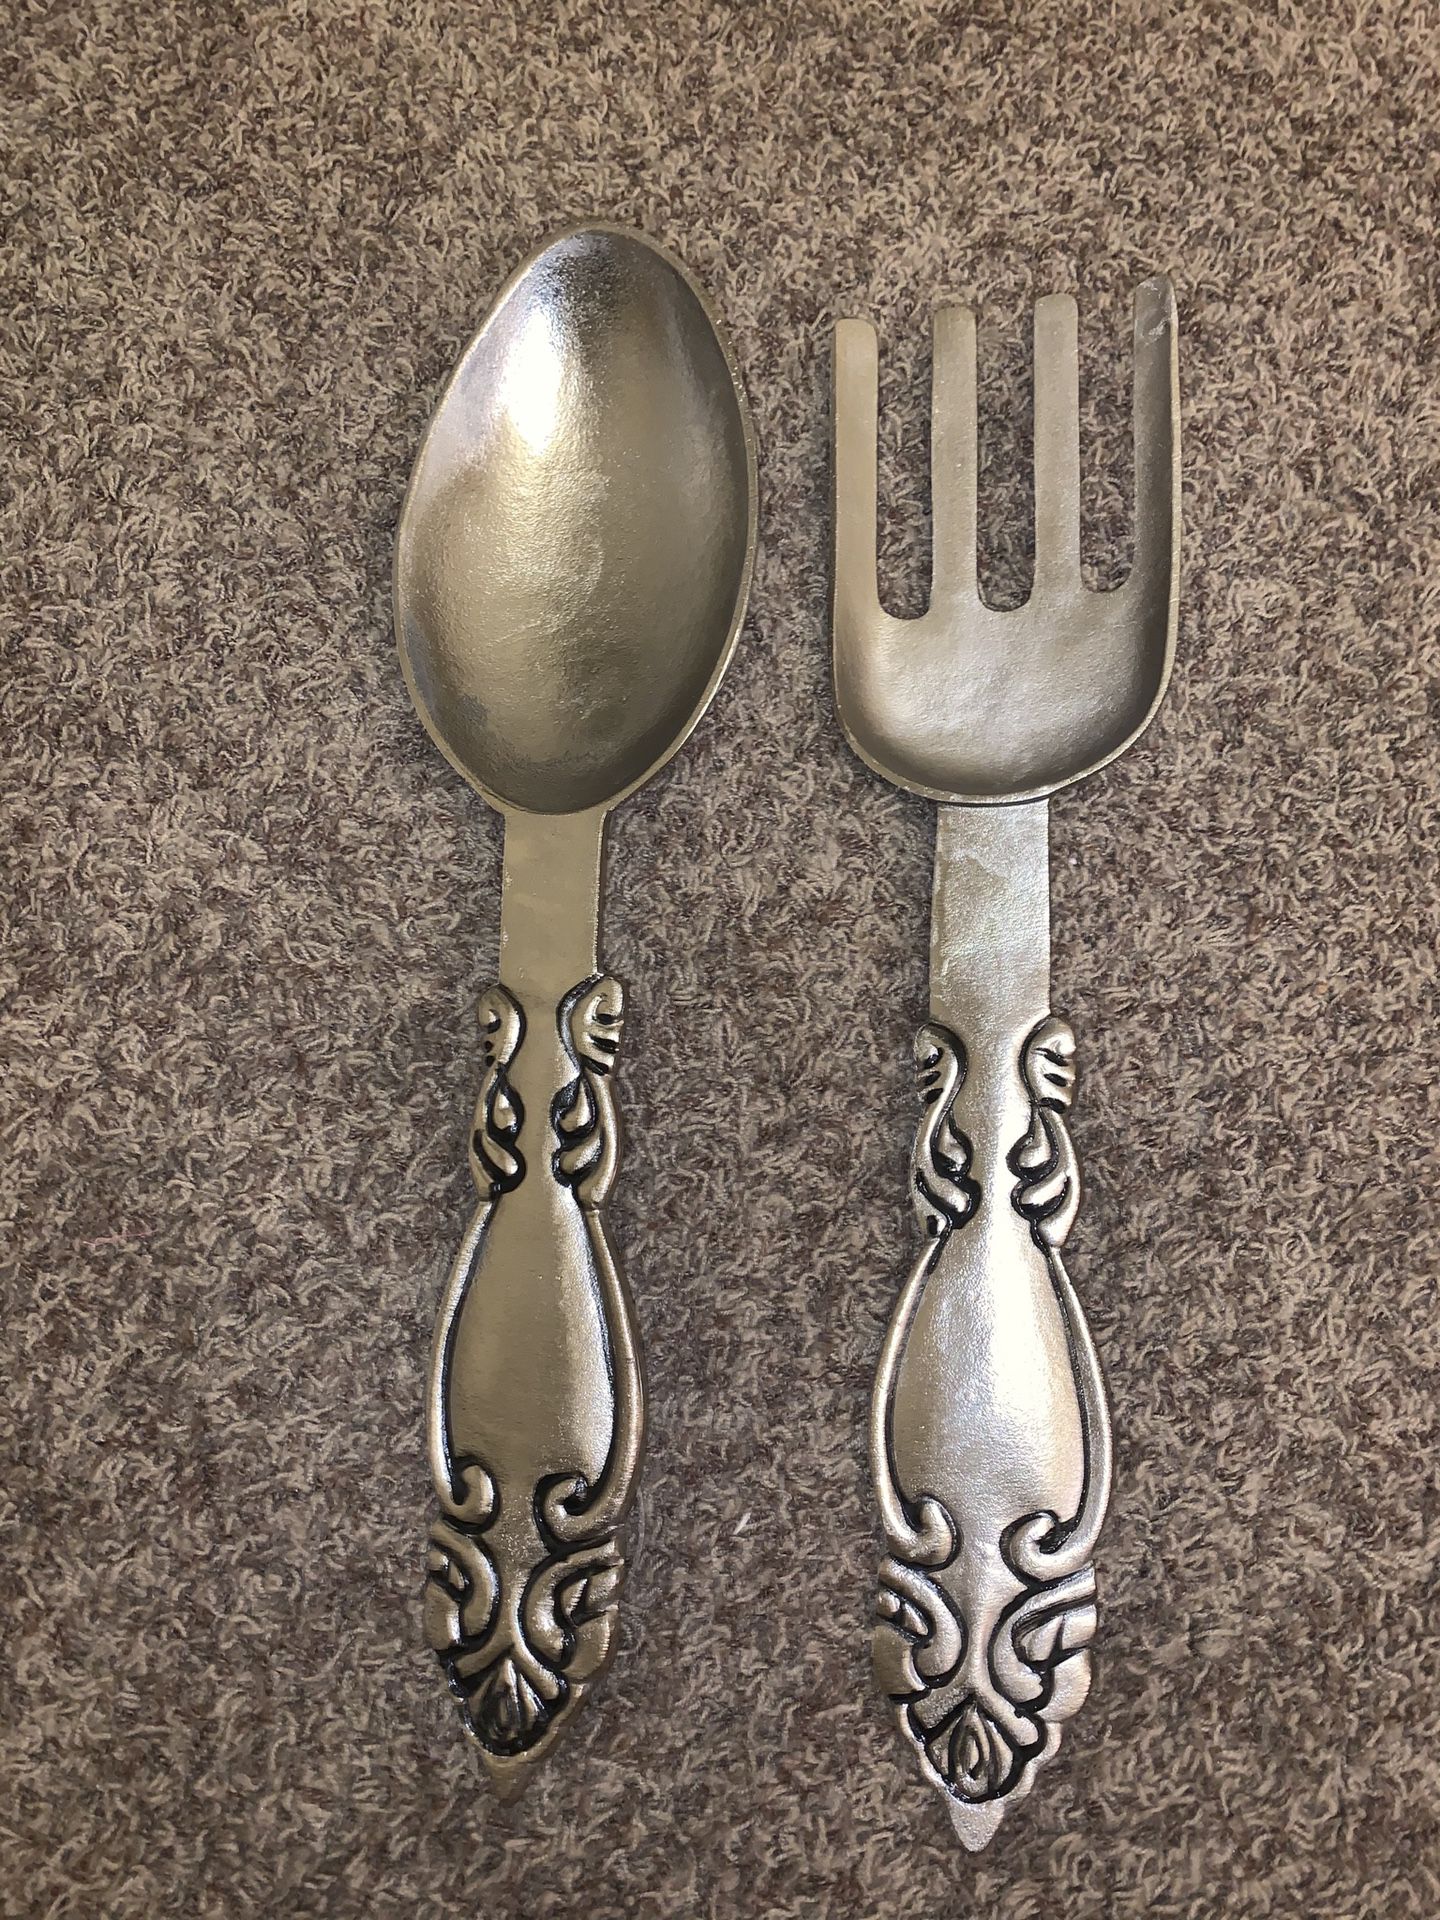 Oversized large ~24” silver spoon and fork decorative kitchen wall decor new